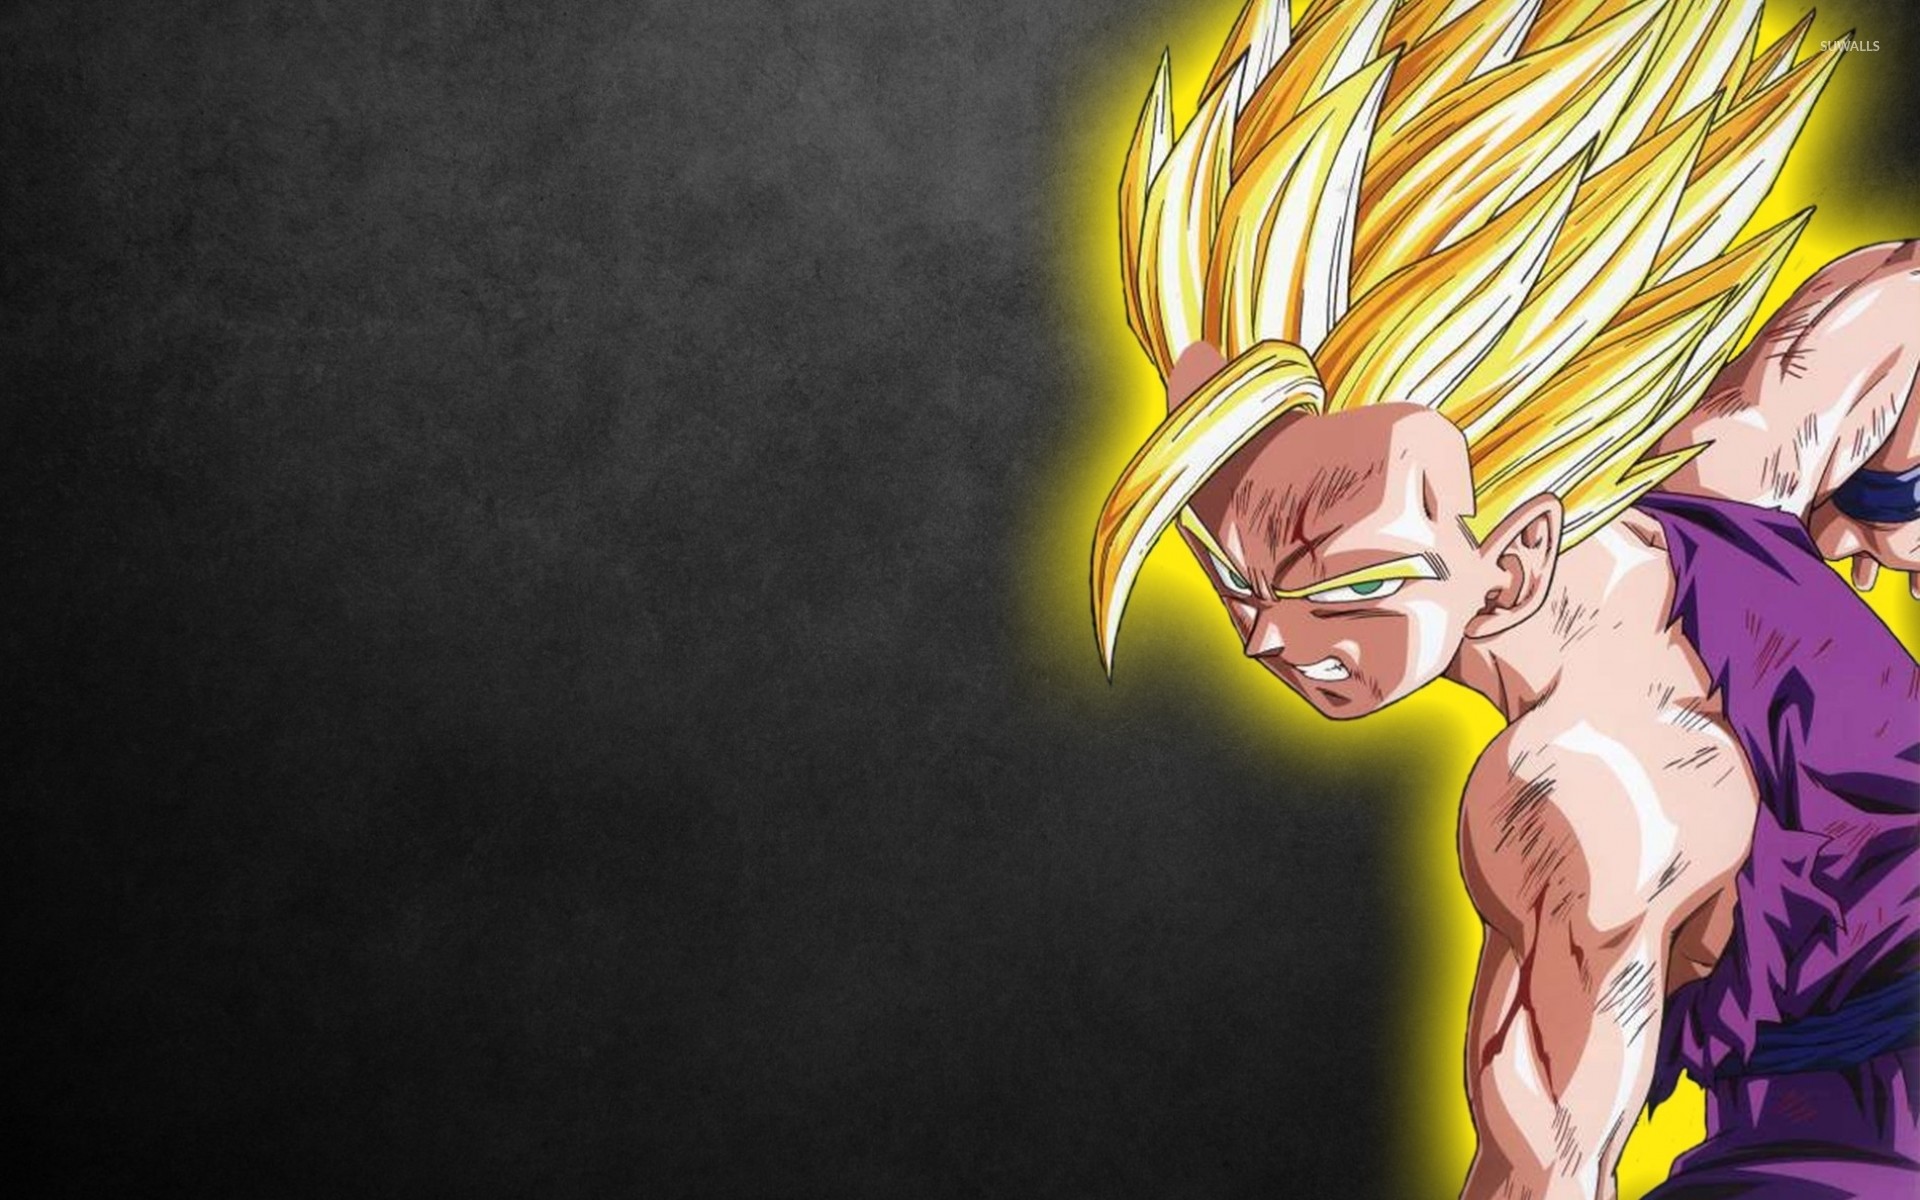 1920x1200 Desktop Images of Dragon Ball Z Wallpapers download for free